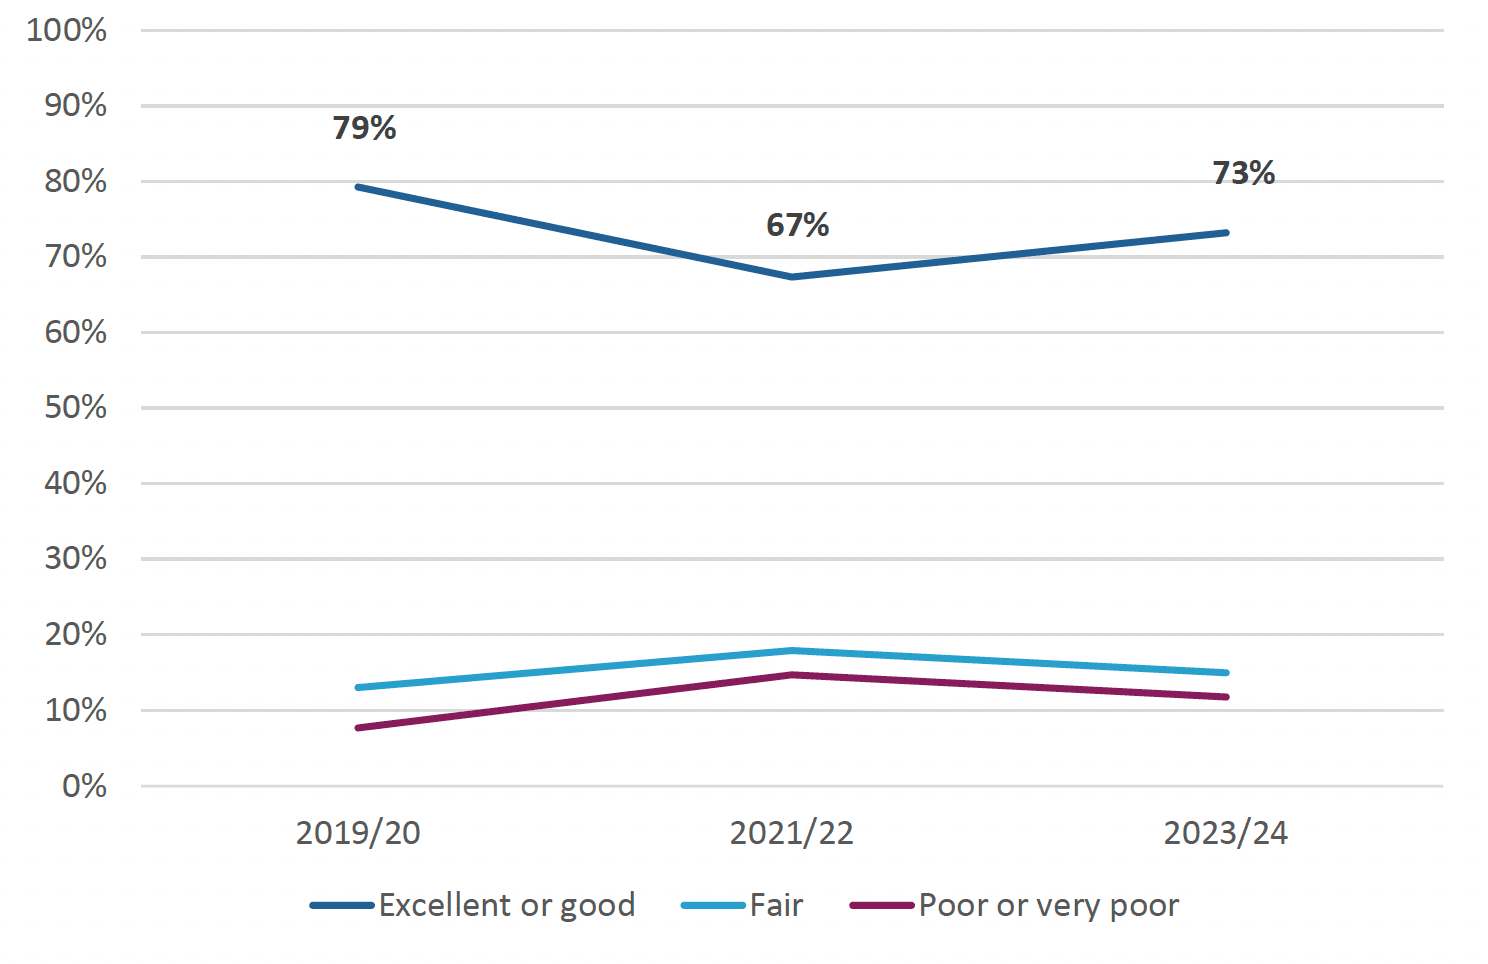 The proportion of people rating overall care from Out of Hours healthcare as excellent or good increased compared with 2021/22, but it is lower than in 2019/20.